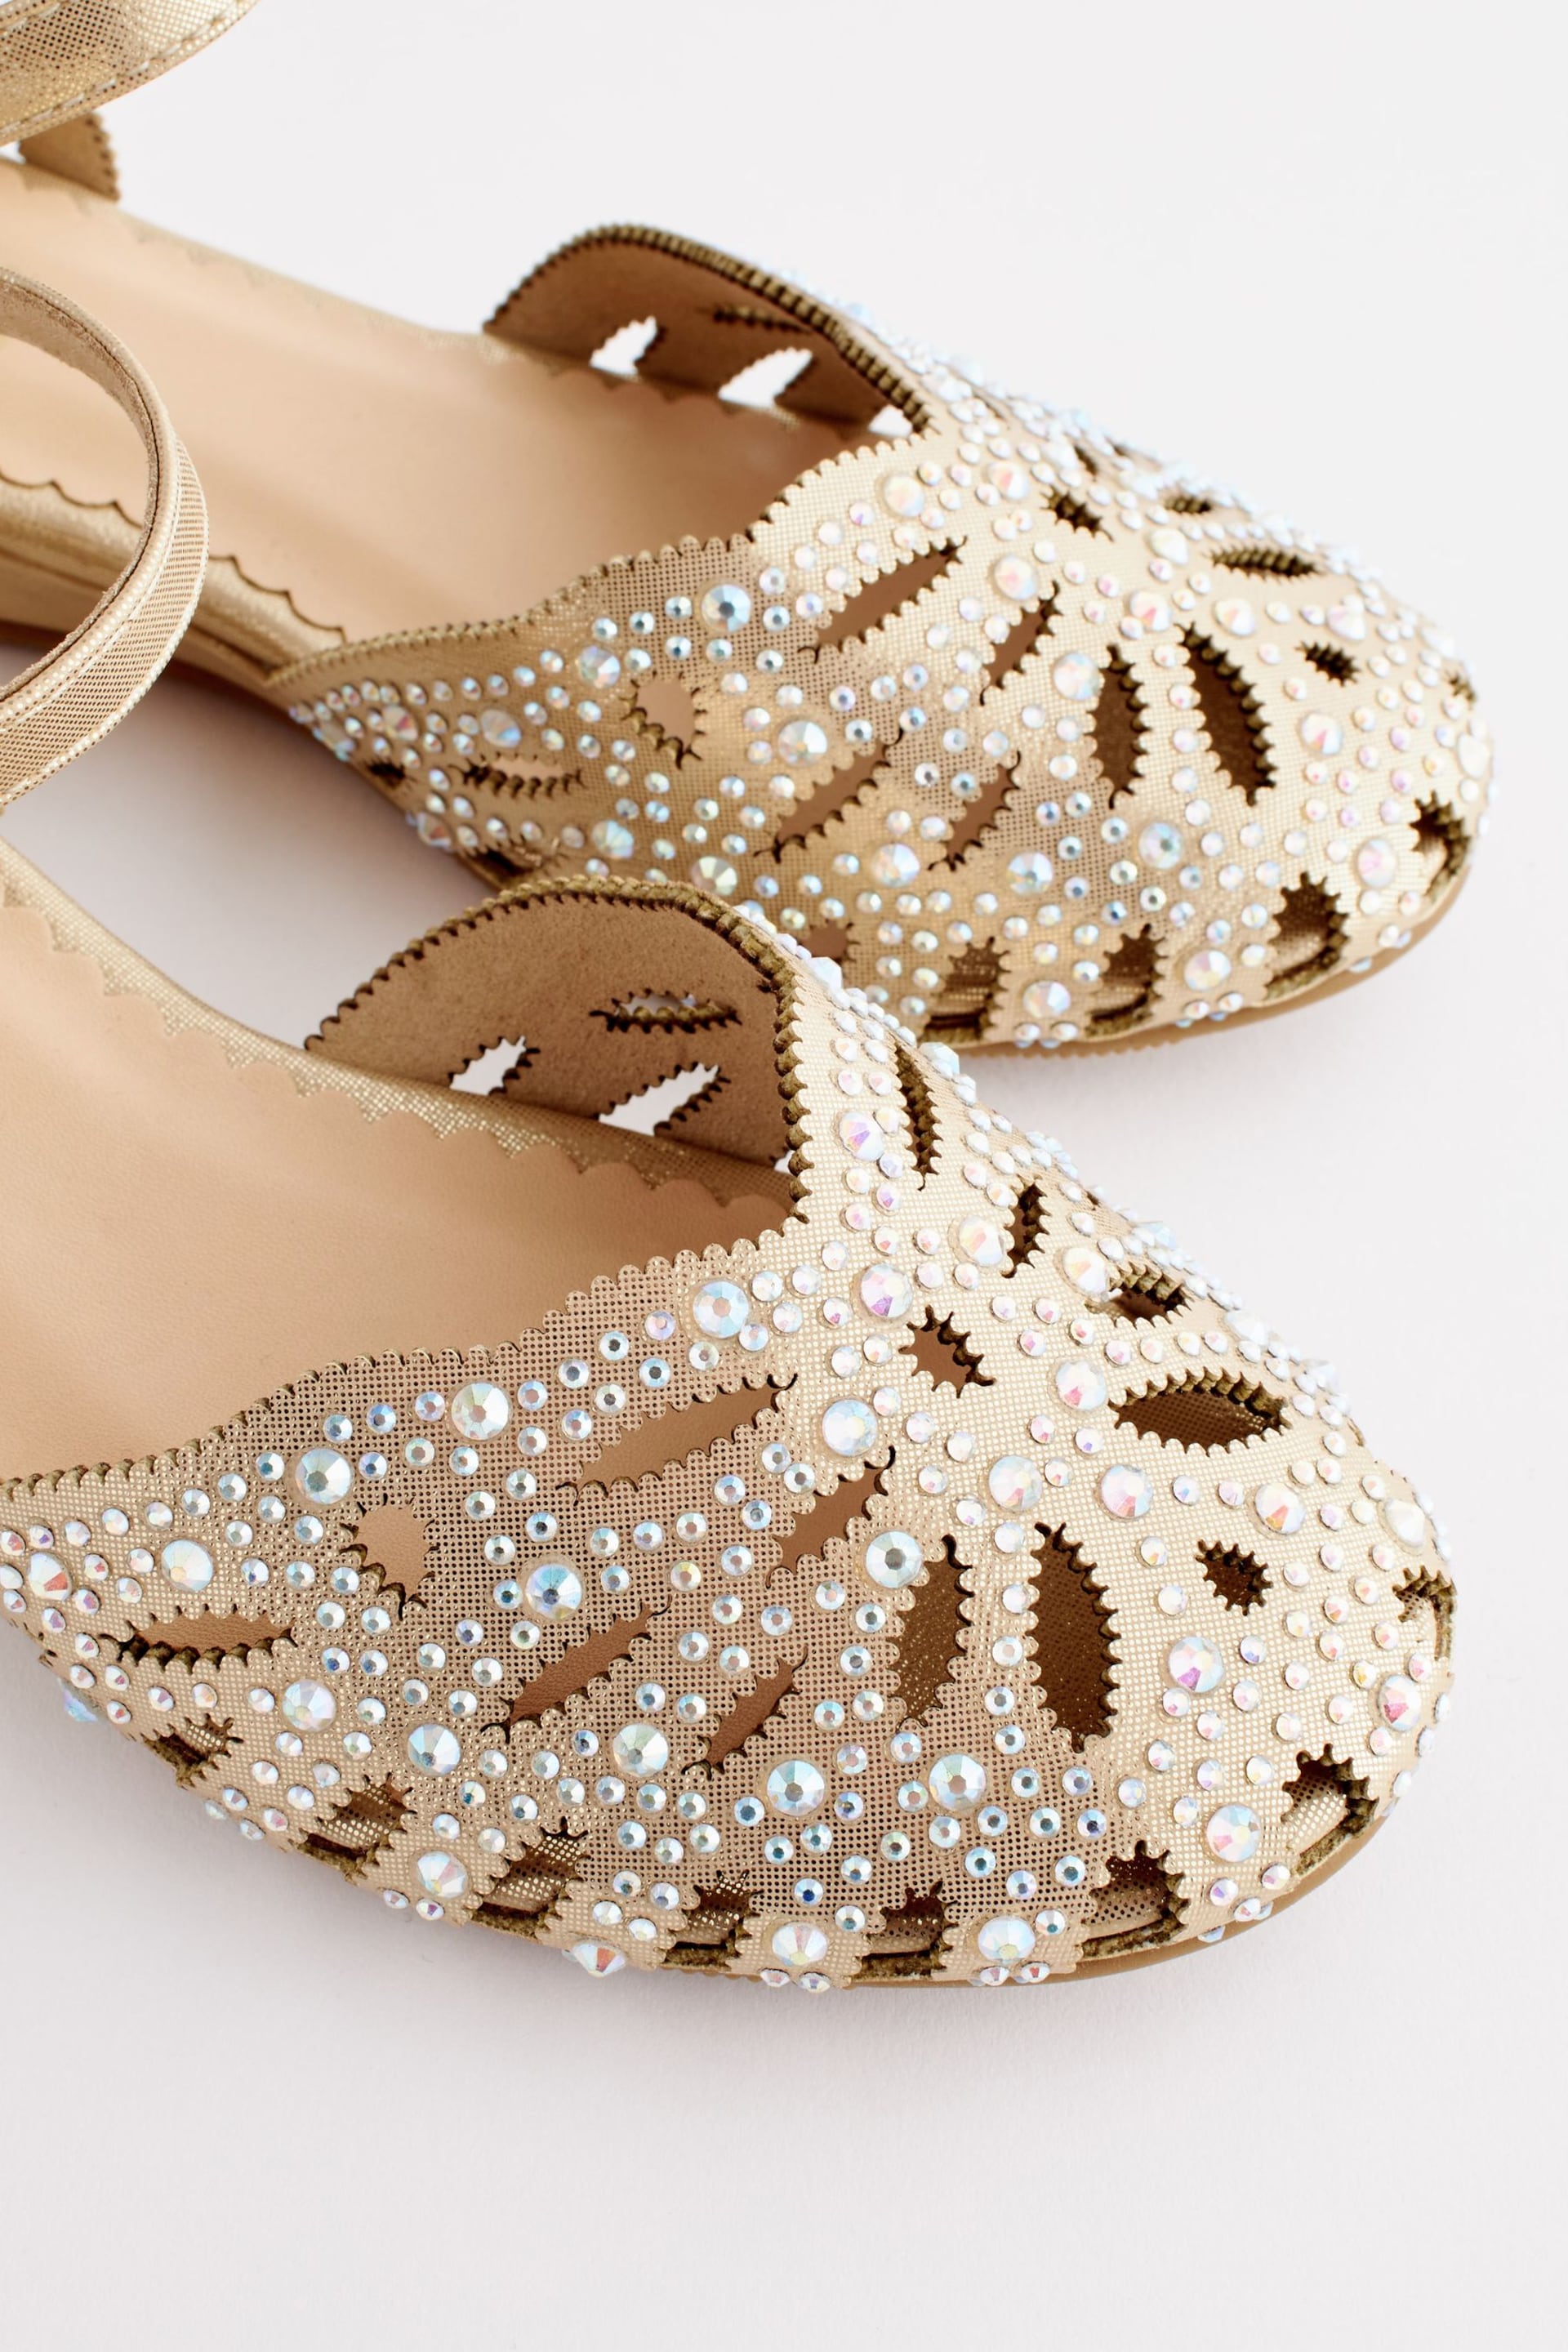 Gold Glitter Wedges - Image 5 of 7